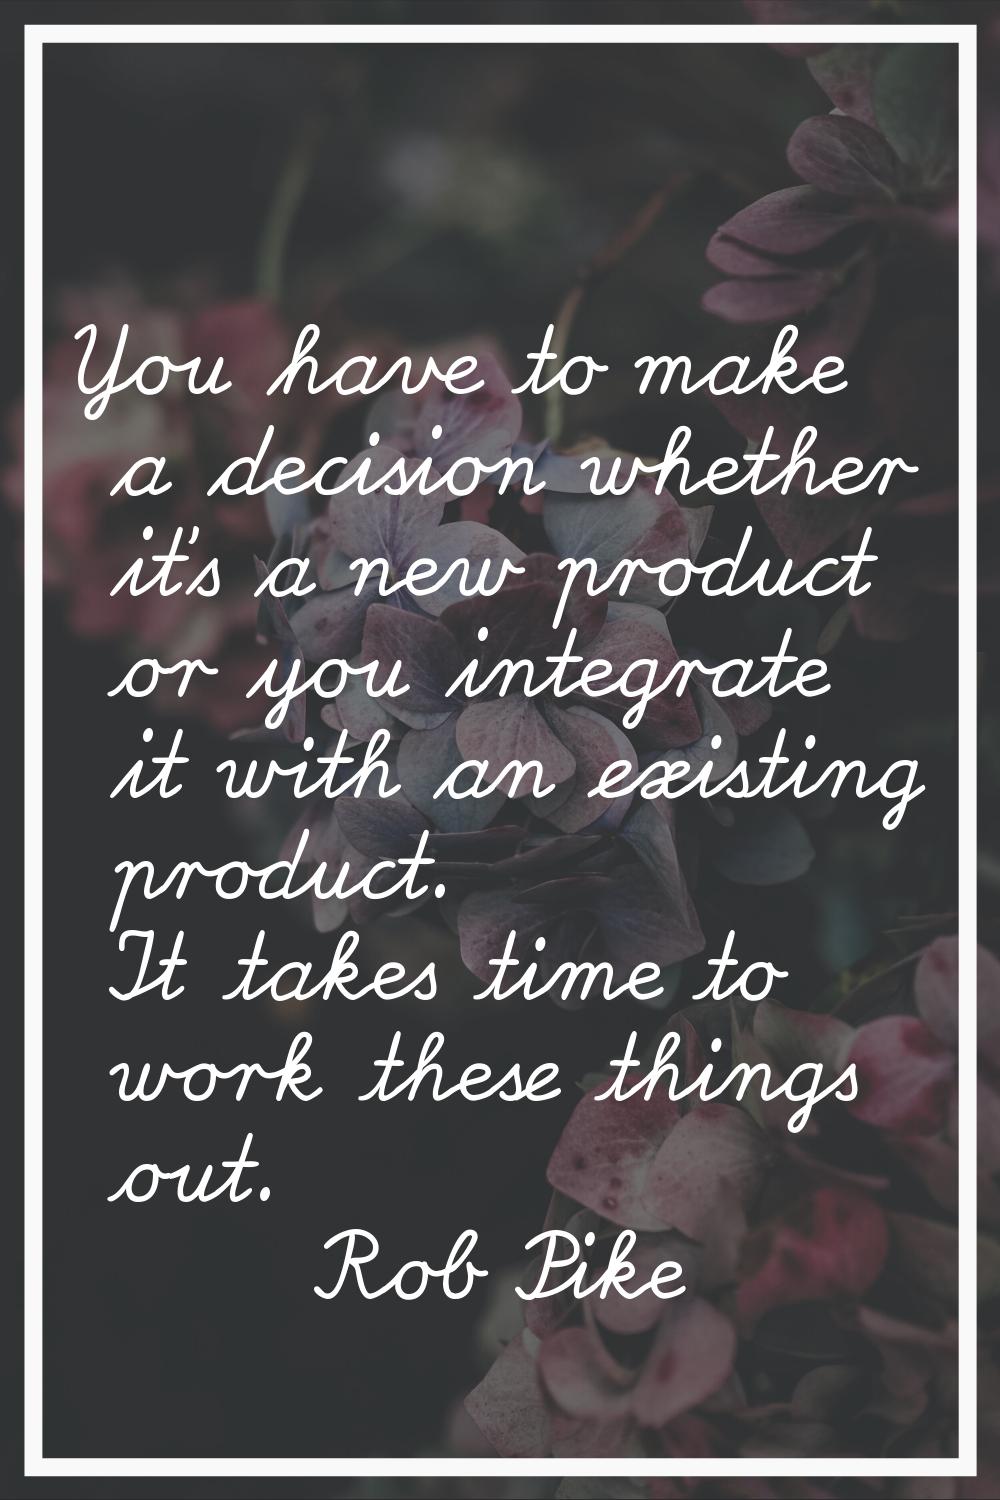 You have to make a decision whether it's a new product or you integrate it with an existing product